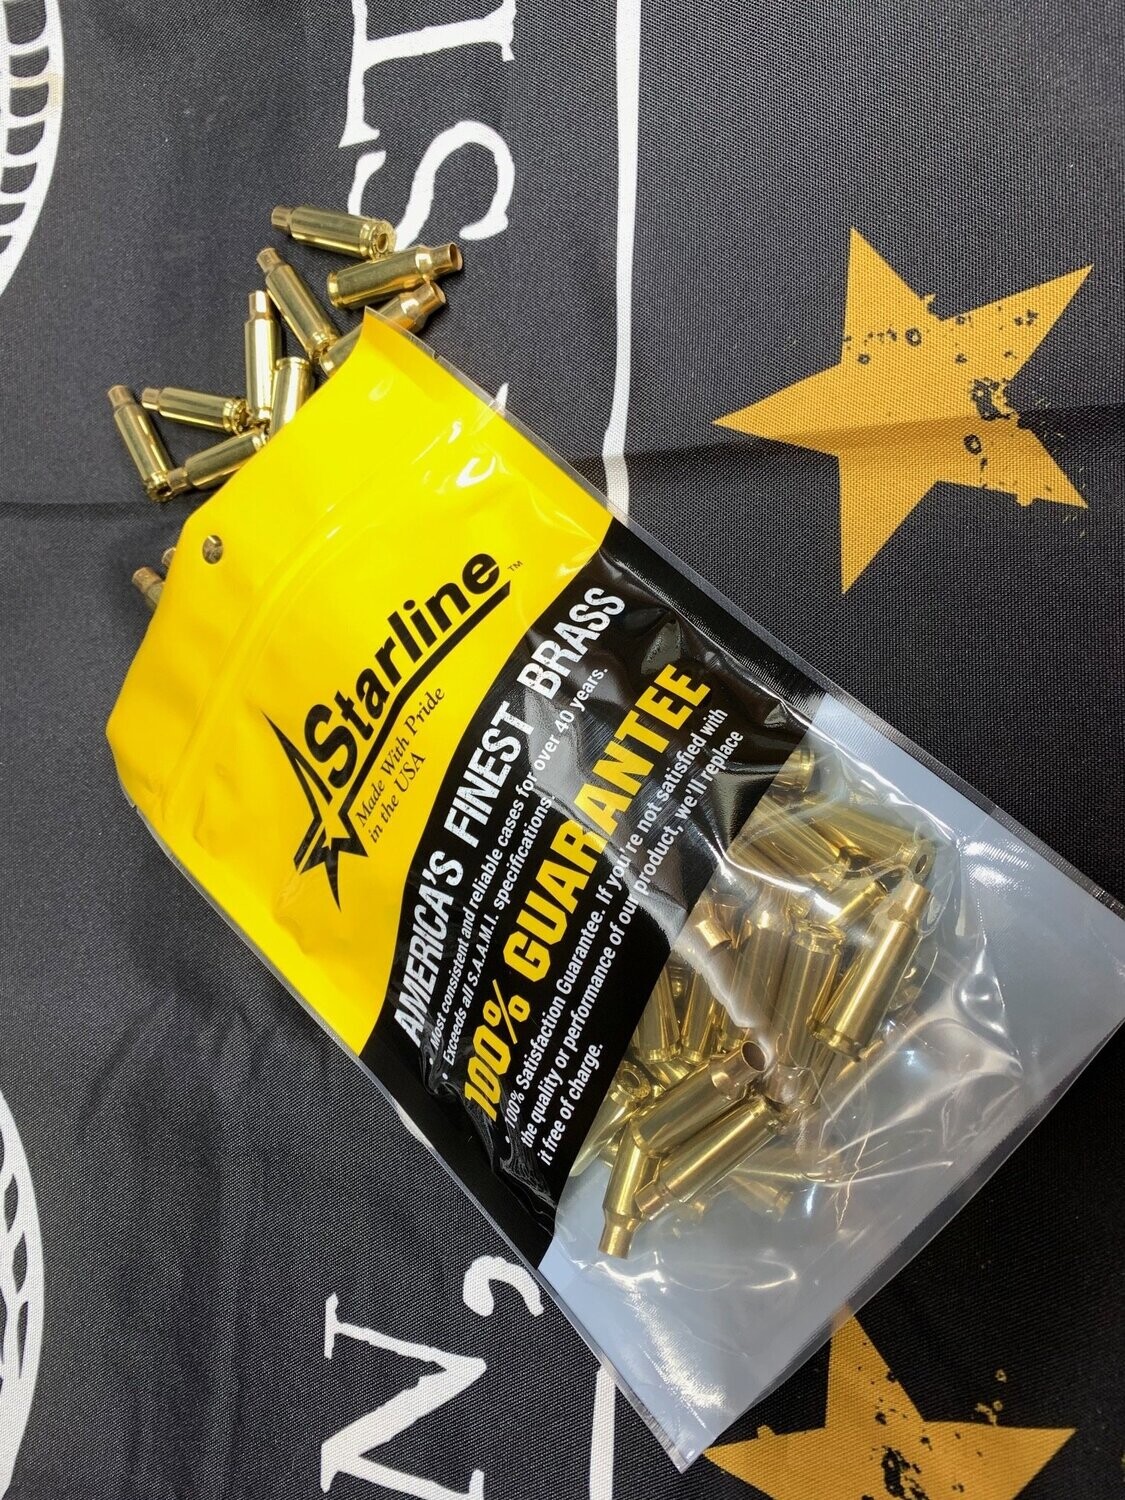 6.0 mm ARC New Starline Brass (Limit 1000 Cases per Household)